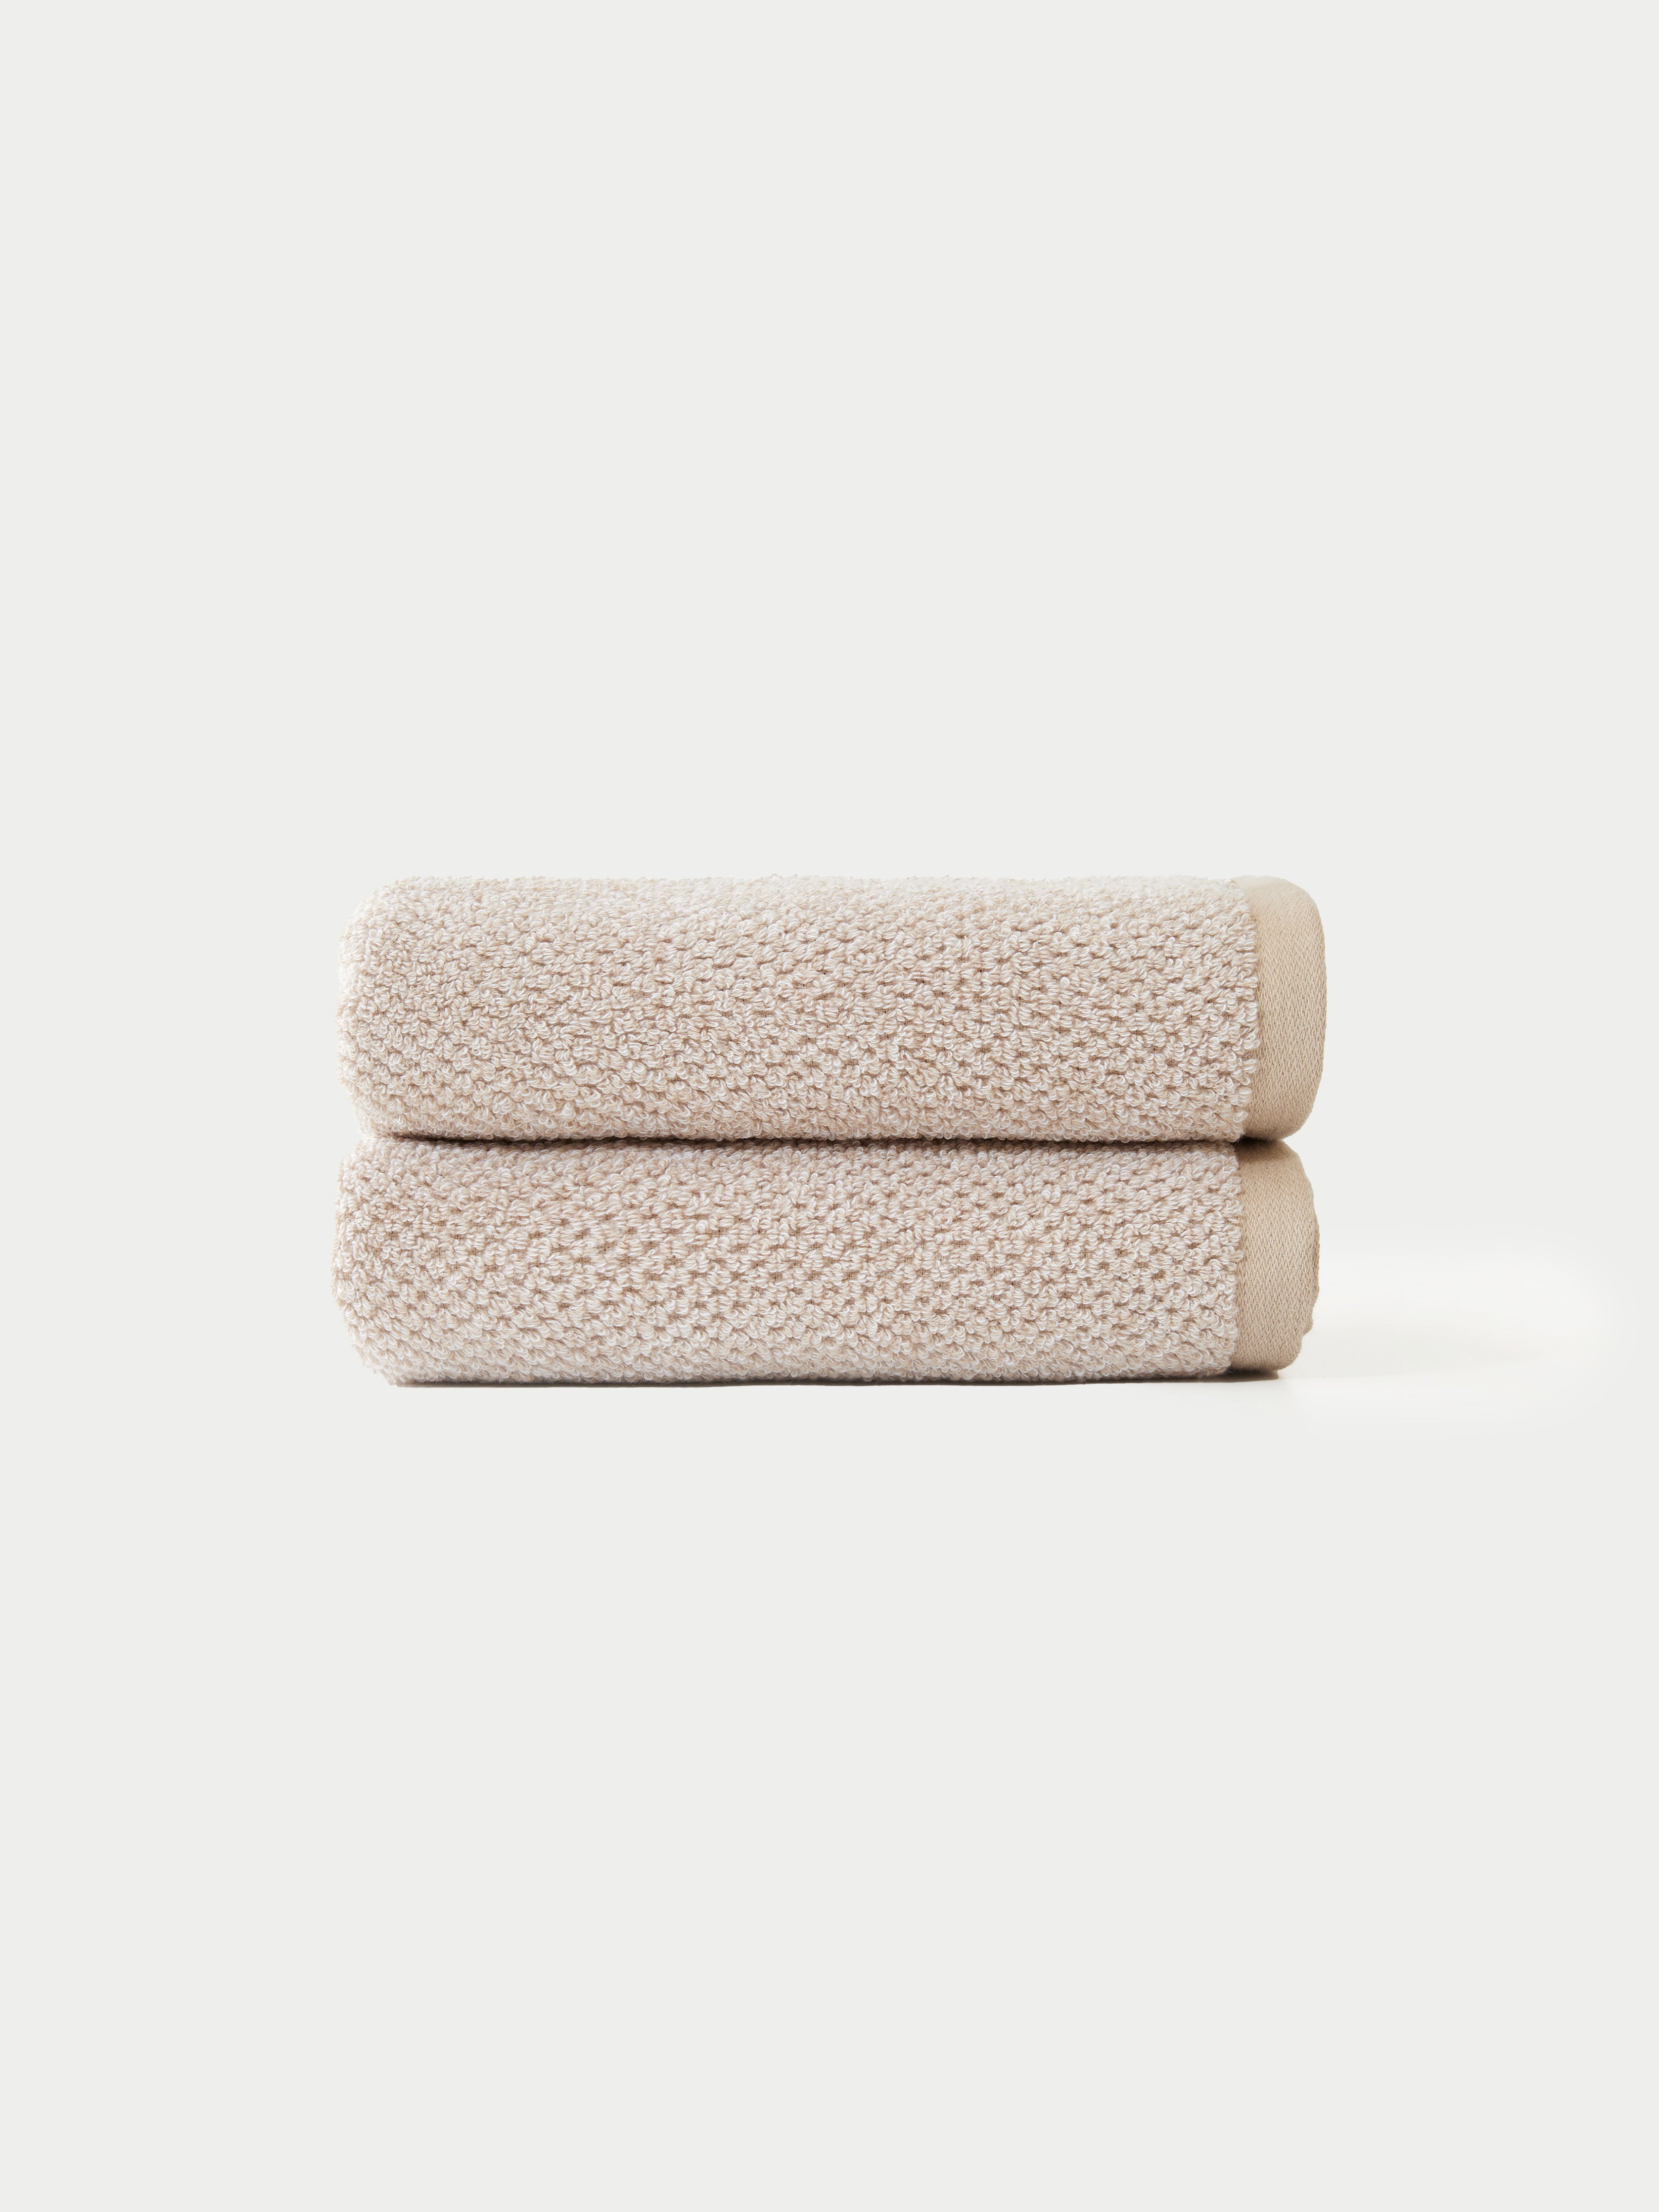 Nantucket Hand Towels in the color Heathered Sand. The Hand Towels are neatly folded. The photo of the Hand Towels was taken with a white background.|Color:Heathered Sand